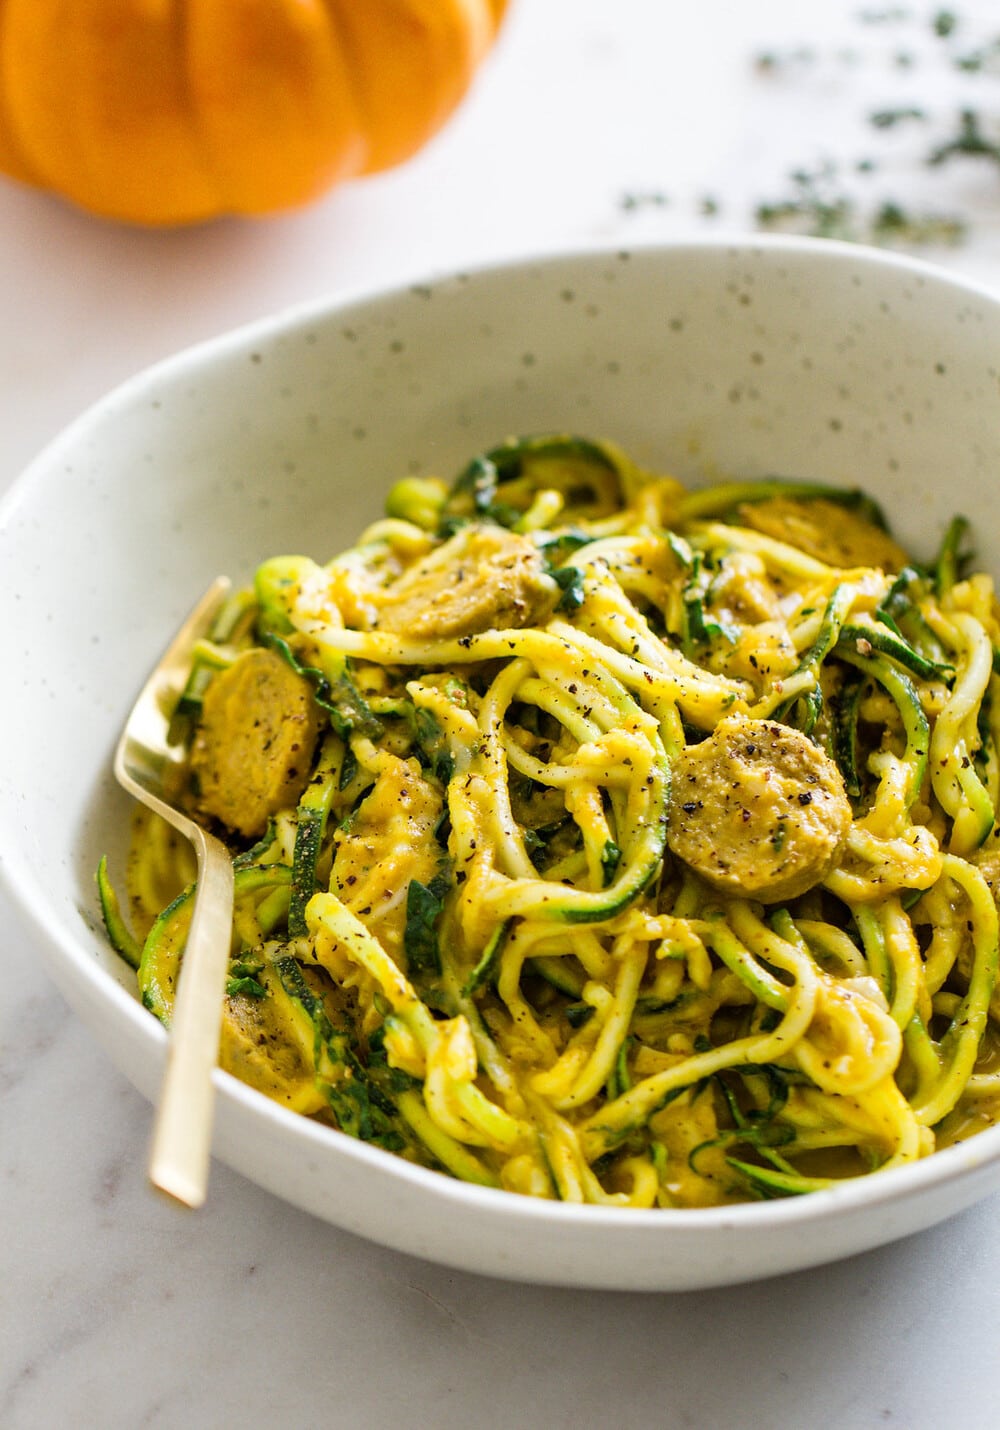 side angle view of creamy pumpkin sauce with kale and mushrooms, tossed with zucchini noodles.